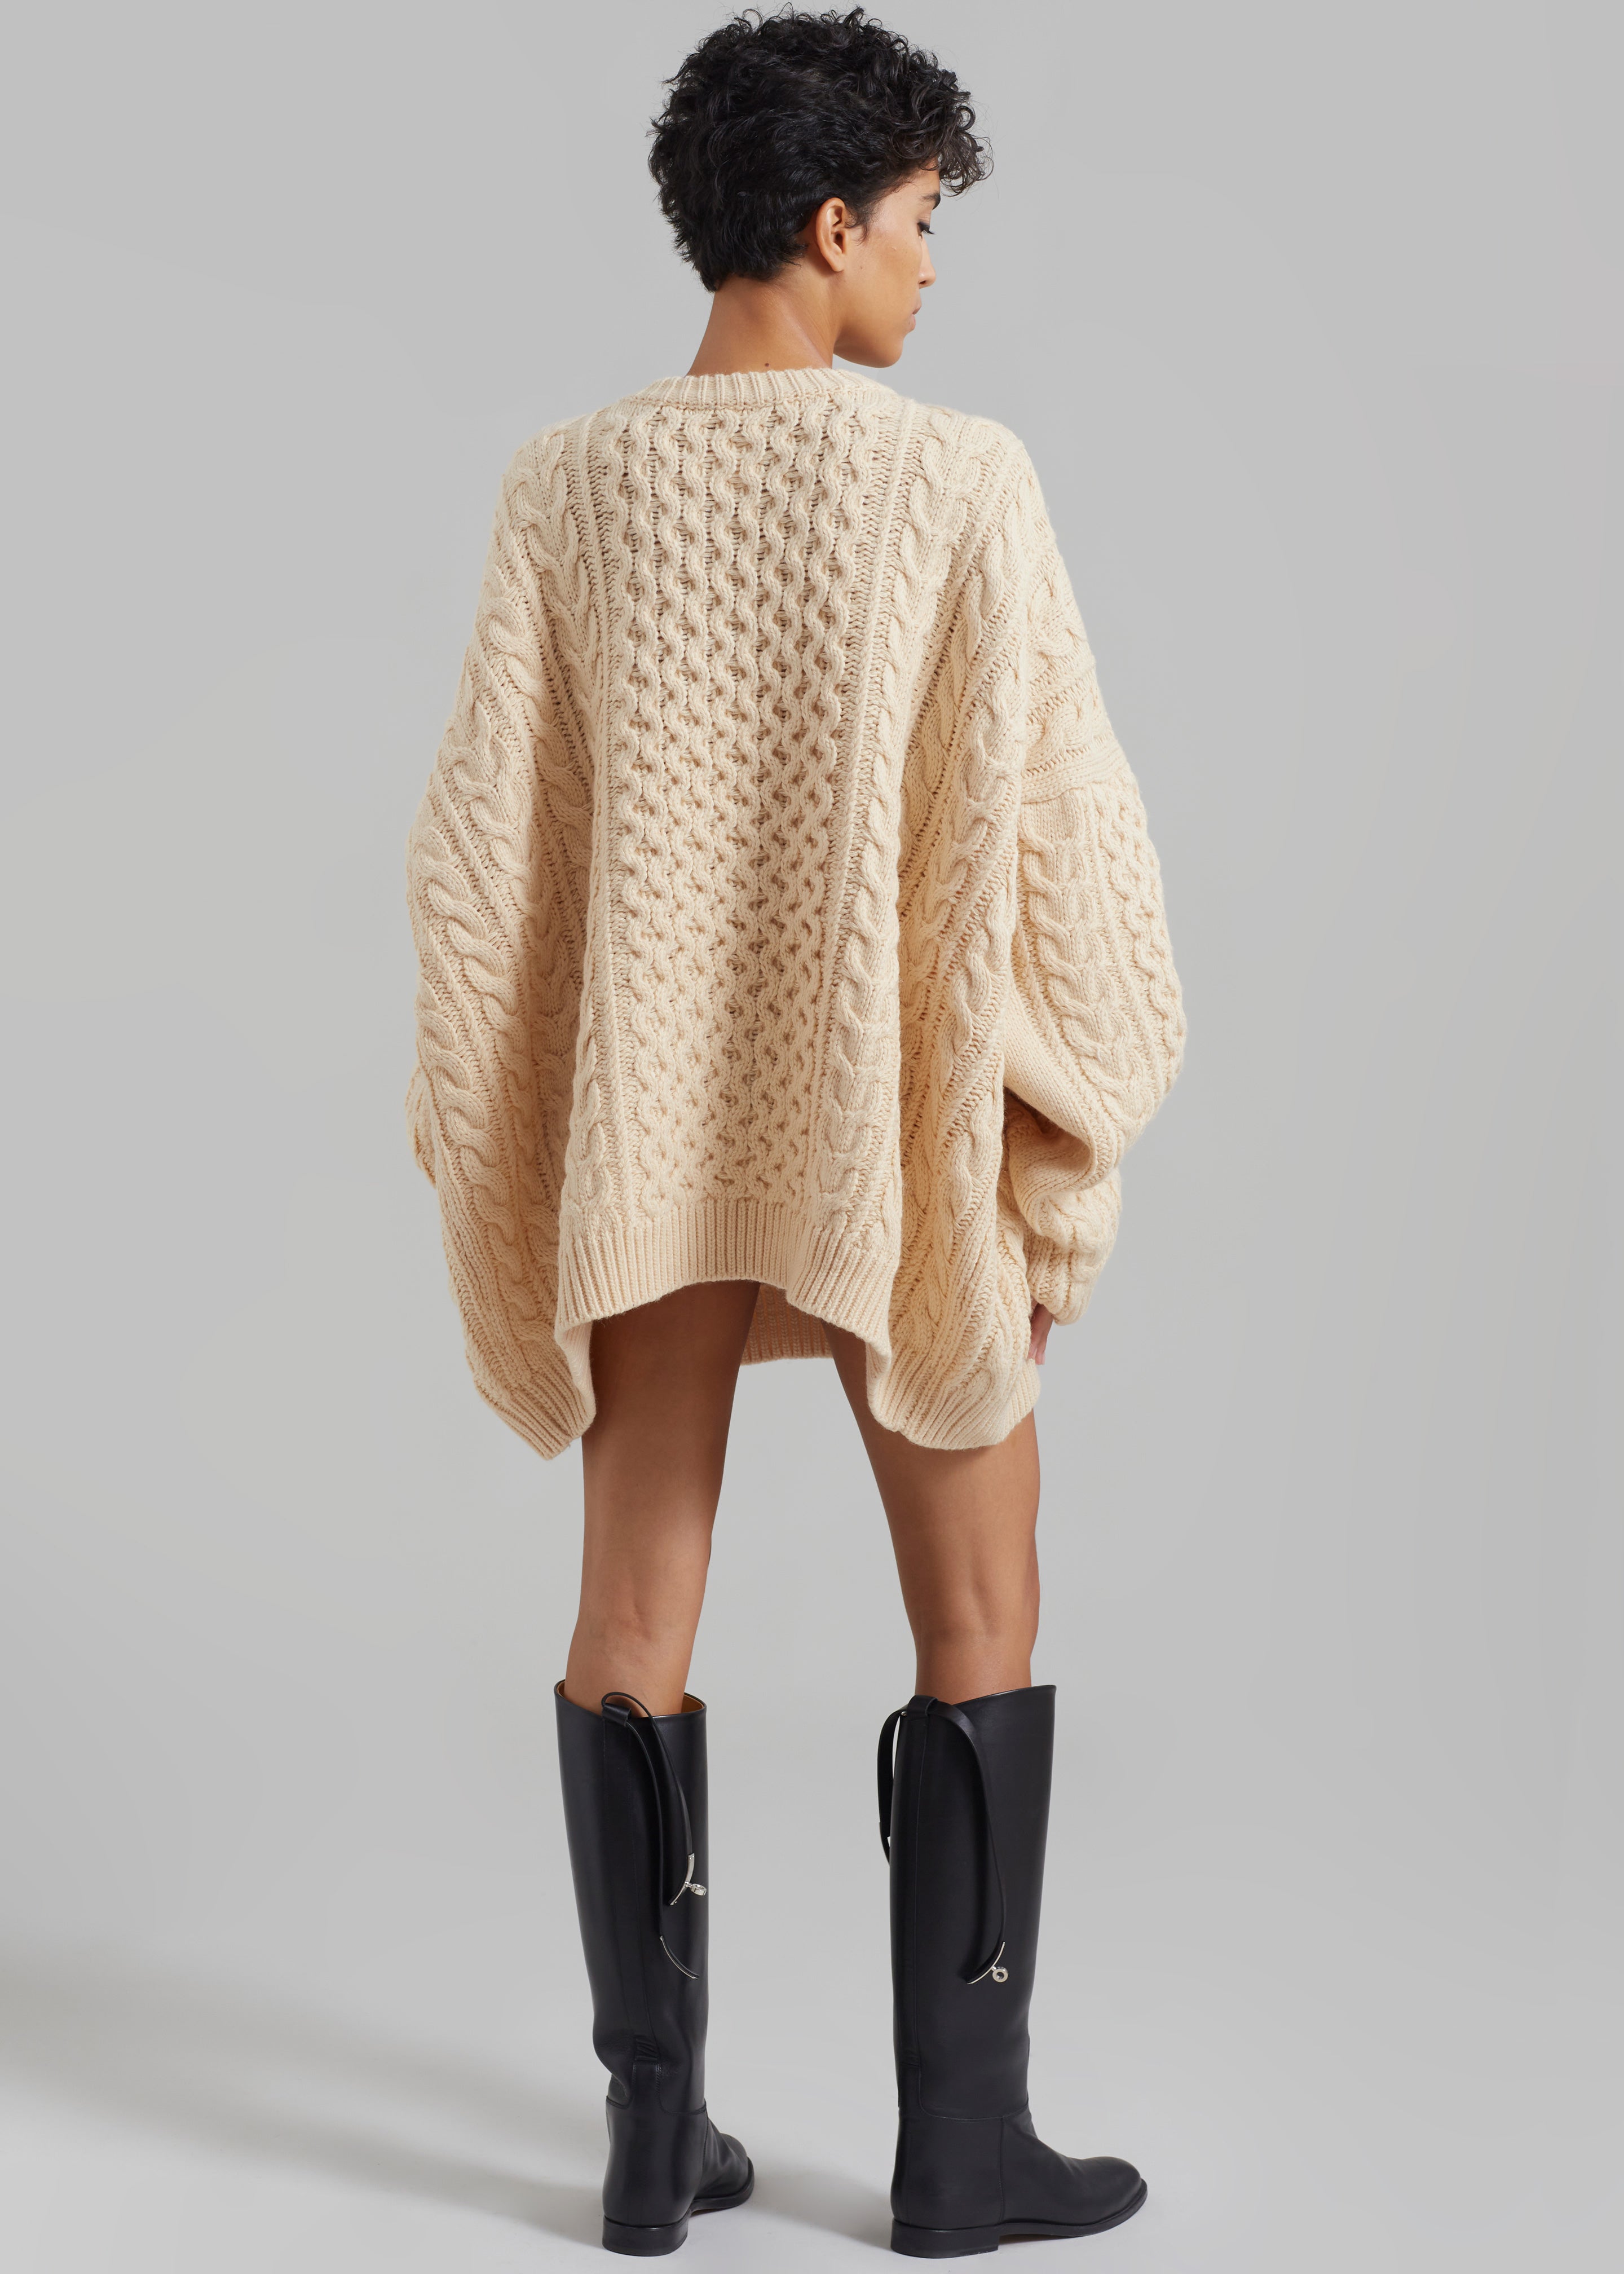 Pailey Braided Sweater - Cream – The Frankie Shop